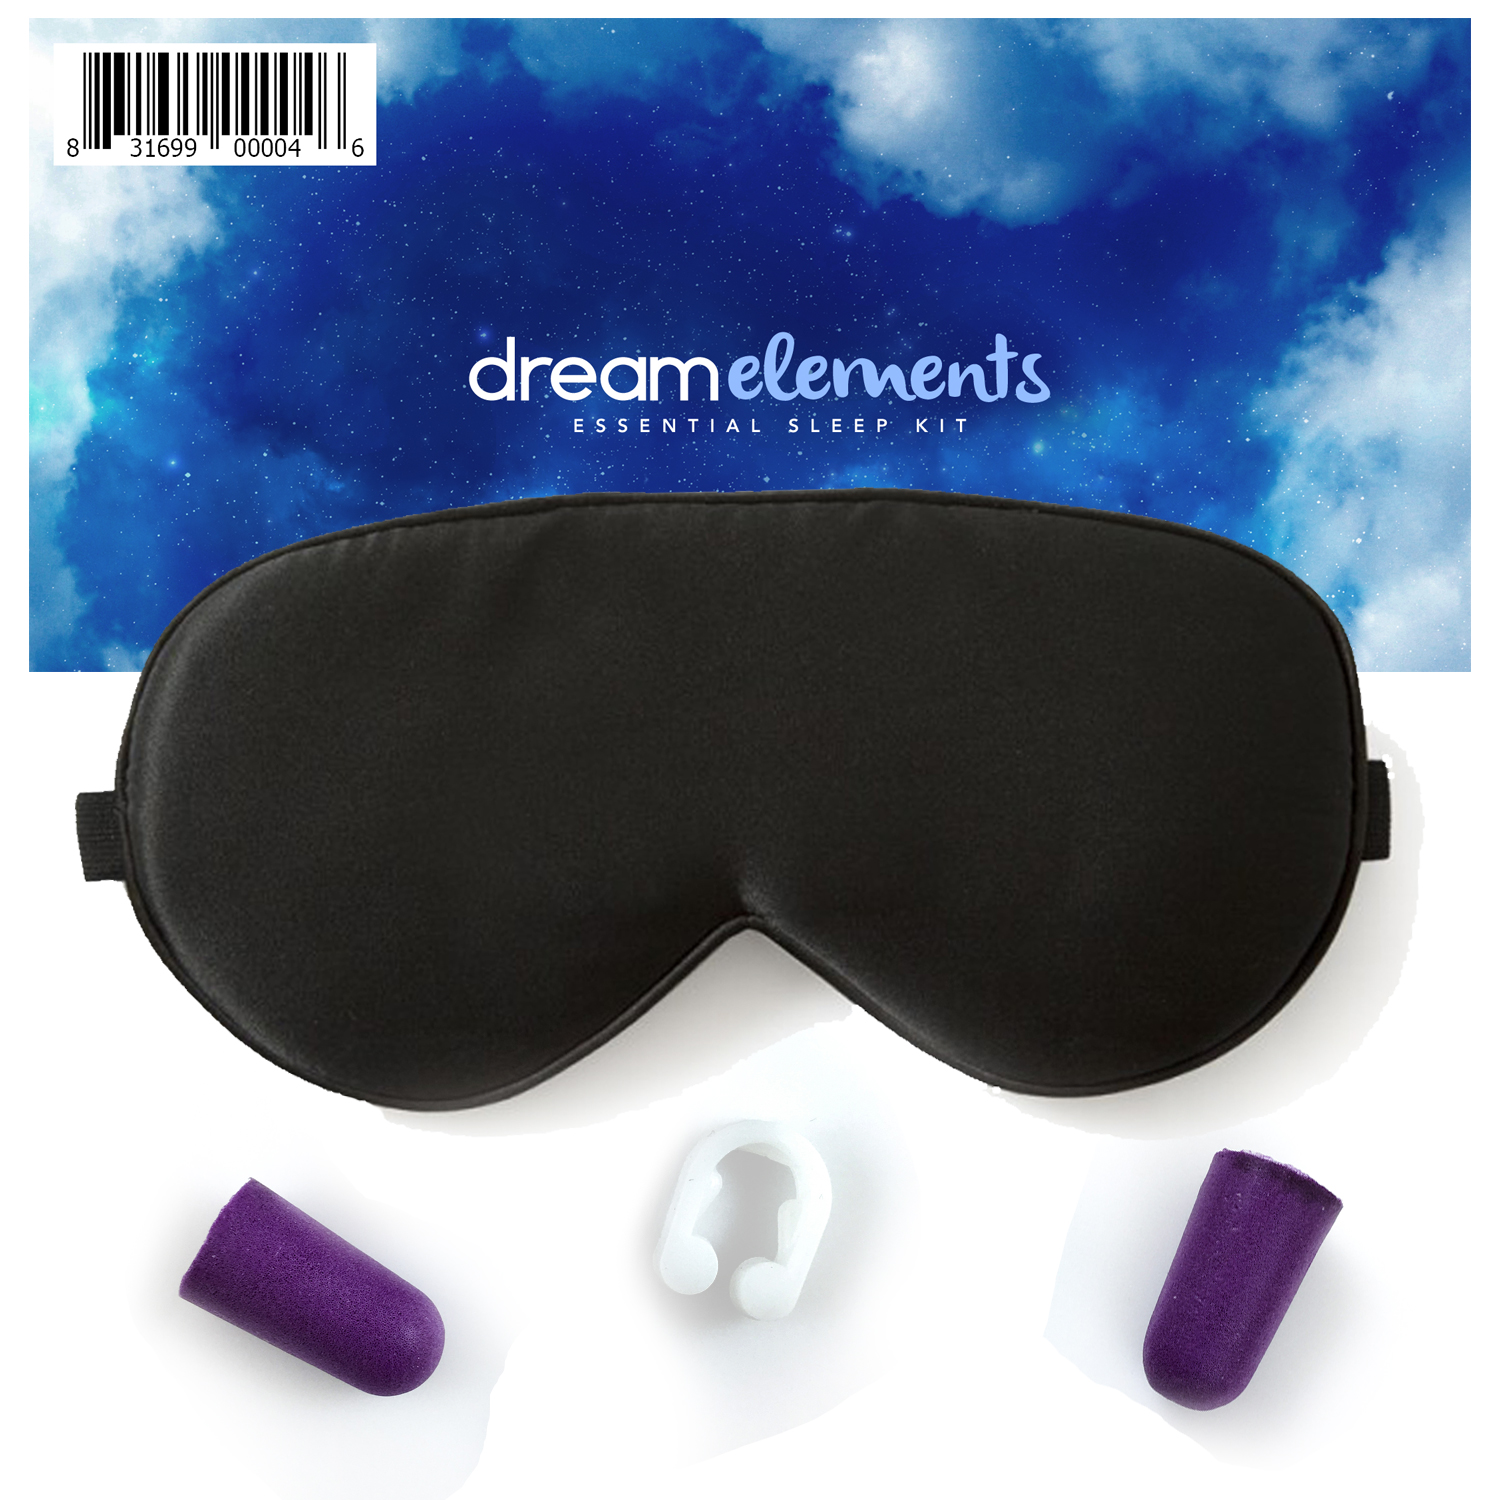 Dream Elements Sleep Mask -- 100% Pure Mulberry Silk Eye Mask - with Foam Ear Plugs & Anti Snoring Nose Clip - For Men & Women - Great for Travel - Hypoallergenic Mask - image 1 of 6